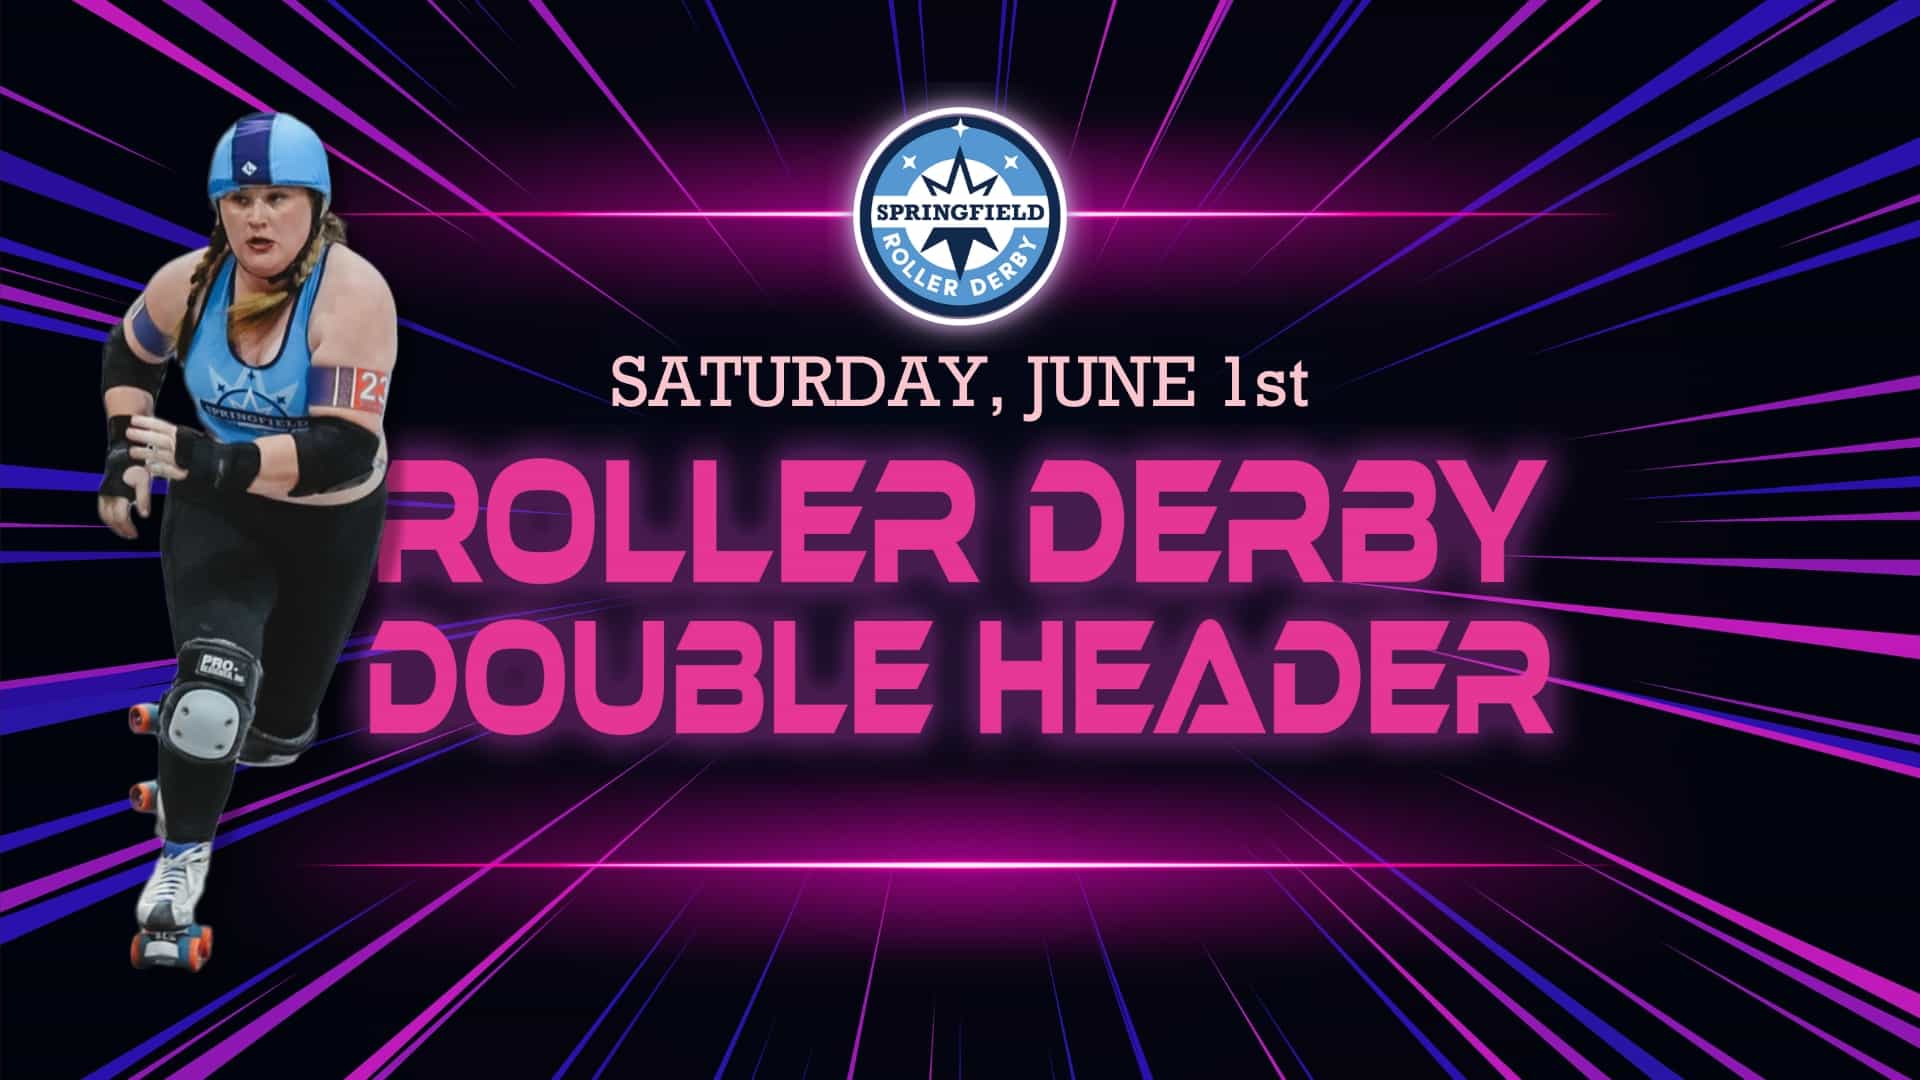 Graphic with laser background, image of SRD skater and SRD logo. Text reads Saturday, June 1st Roller Derby Double Header.